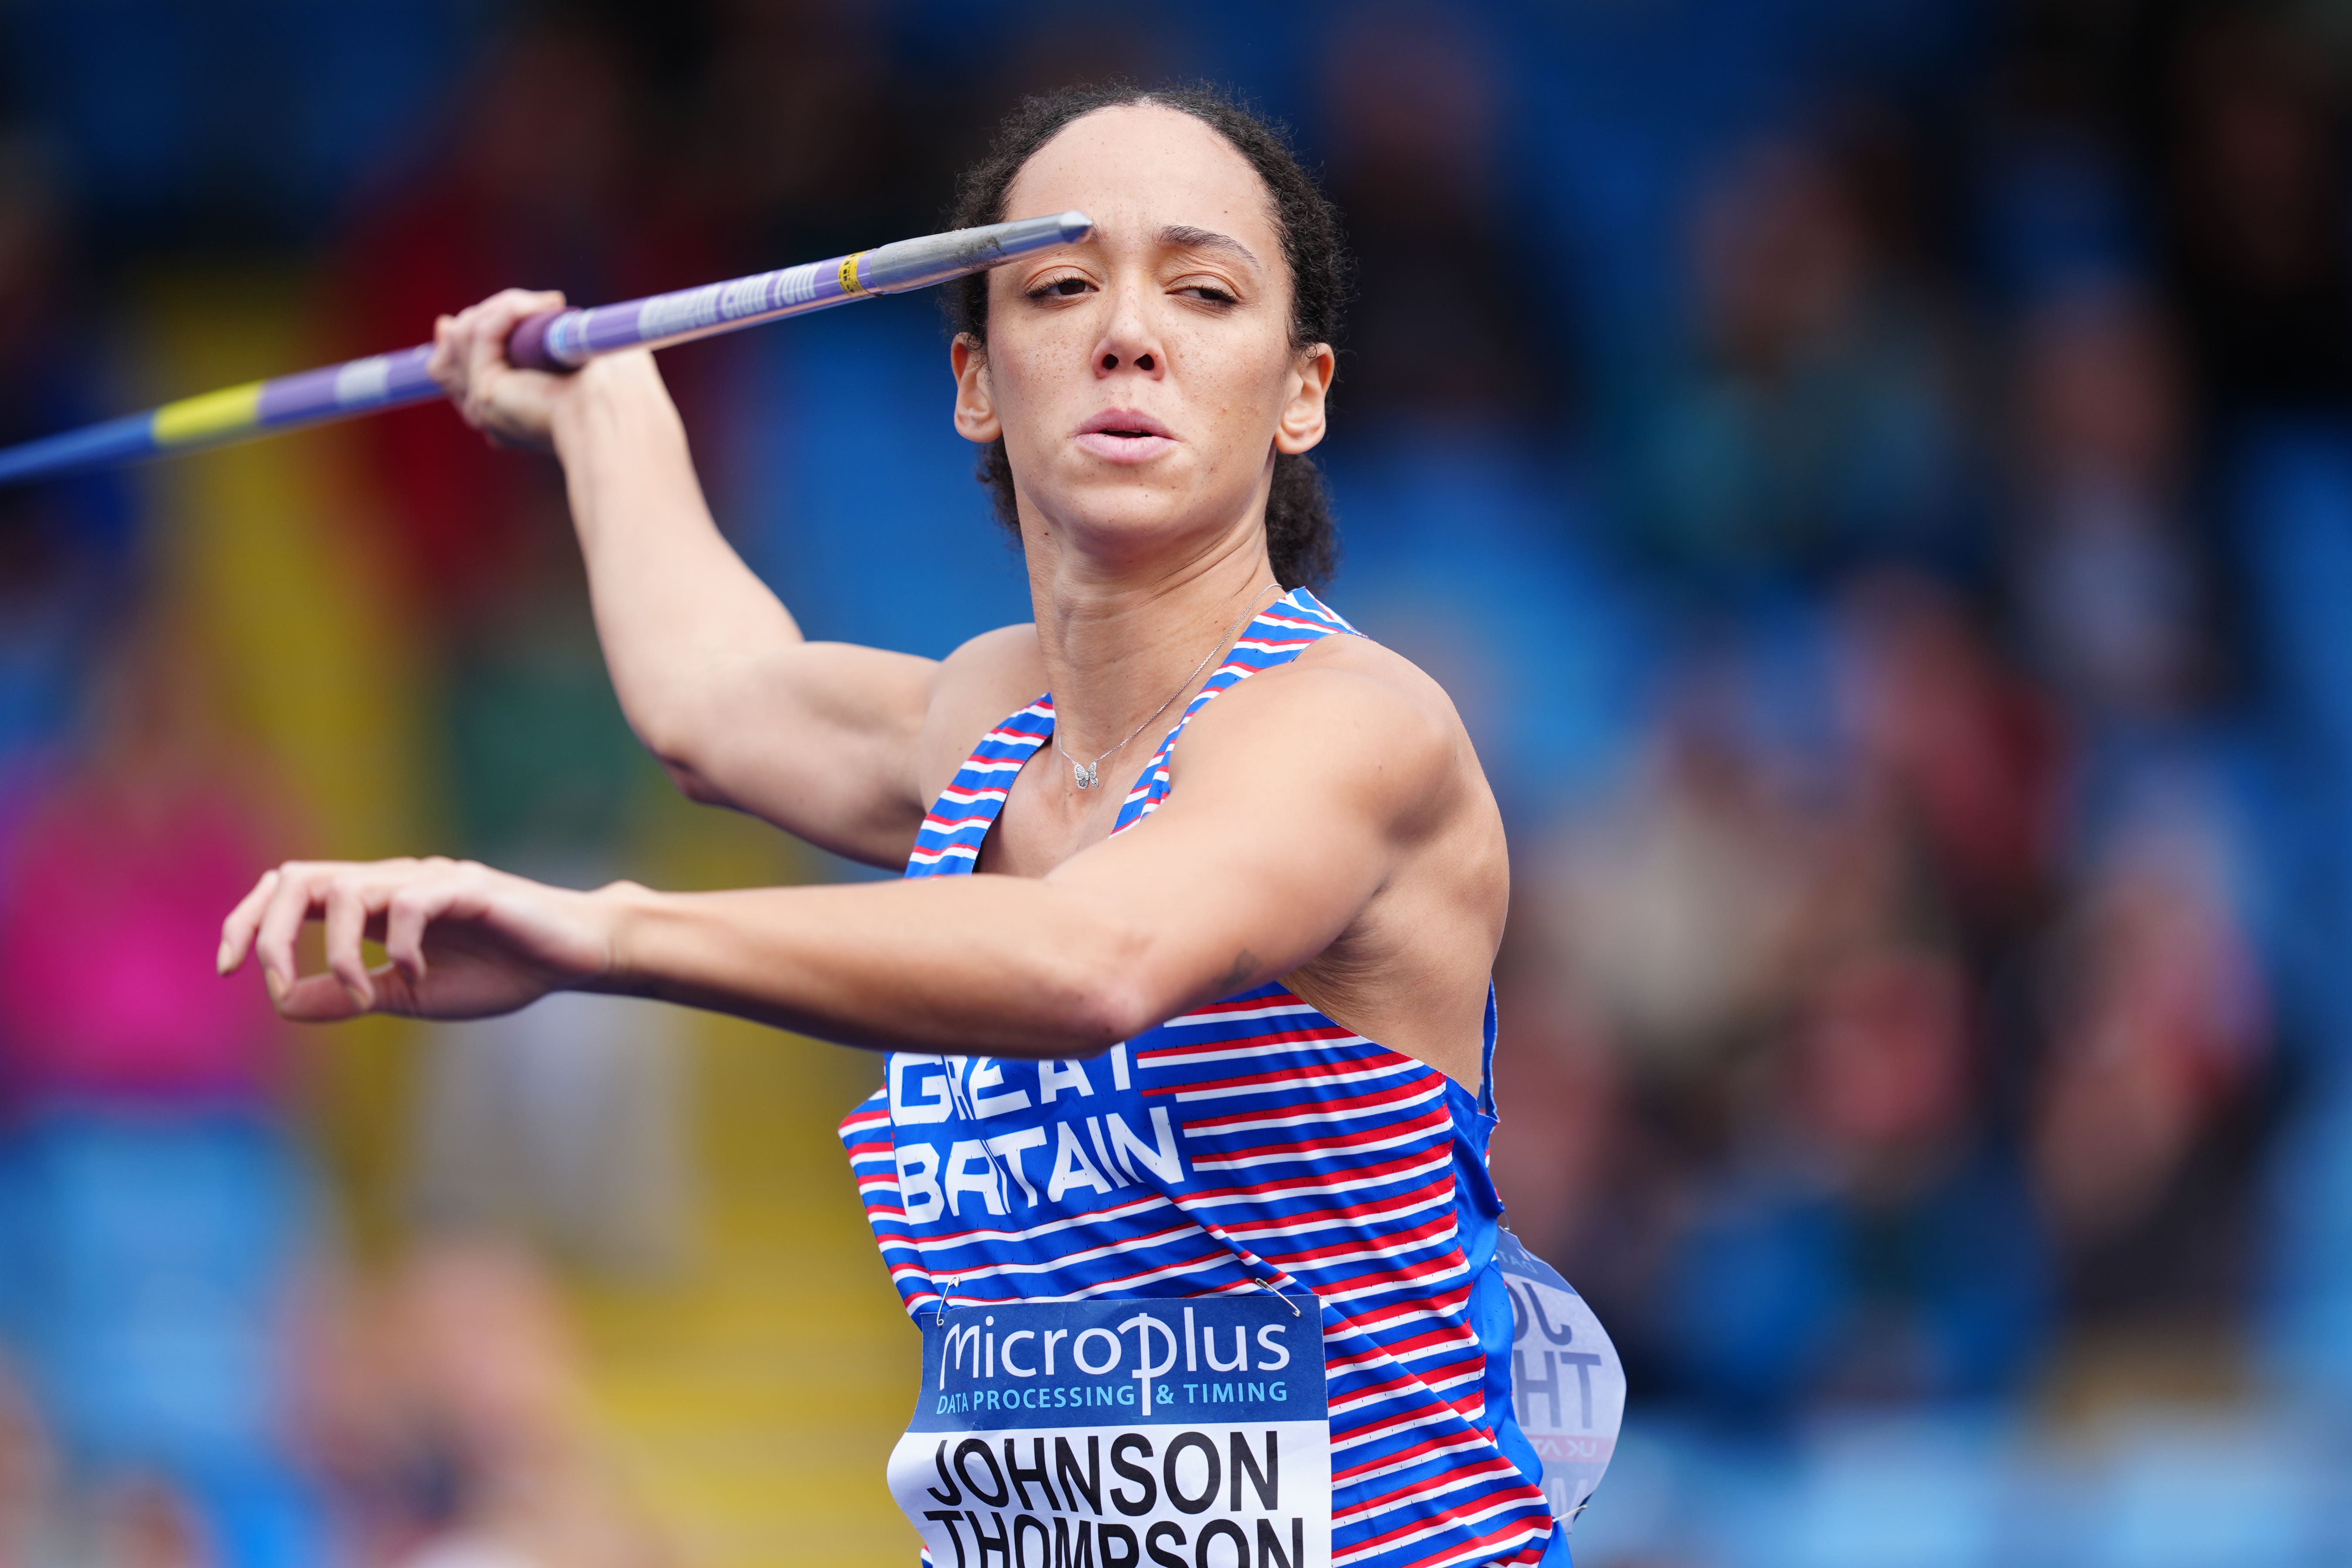 Katarina Johnson-Thompson was in action in the javelin at the UK Championships in Manchester (David Davies/PA)